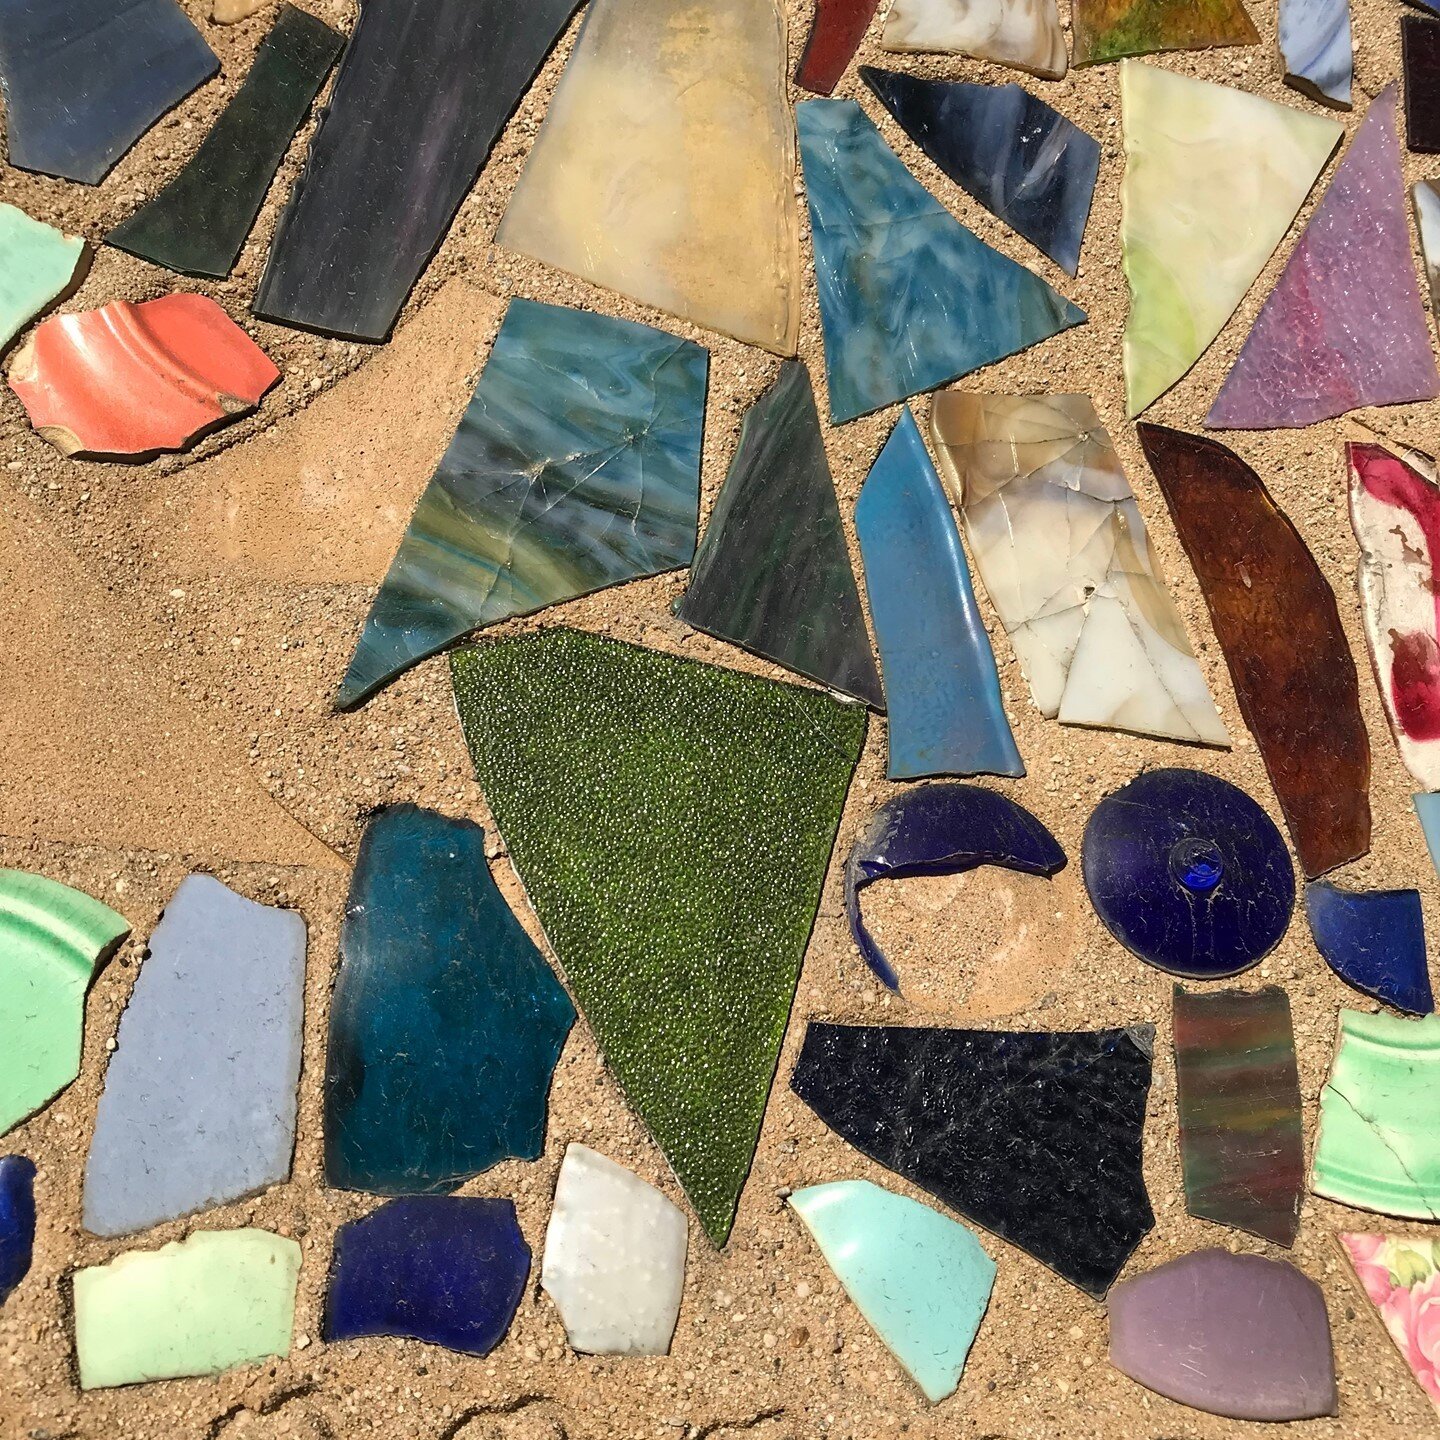 Summer is THE time for art outside. One of my favorite projects is making mosaic stepping stones. I break down the whole process in my book (order in our linktree!) and make lasting and beautiful stones with kids and adults!⁠
⁠
This beautiful mosaic 